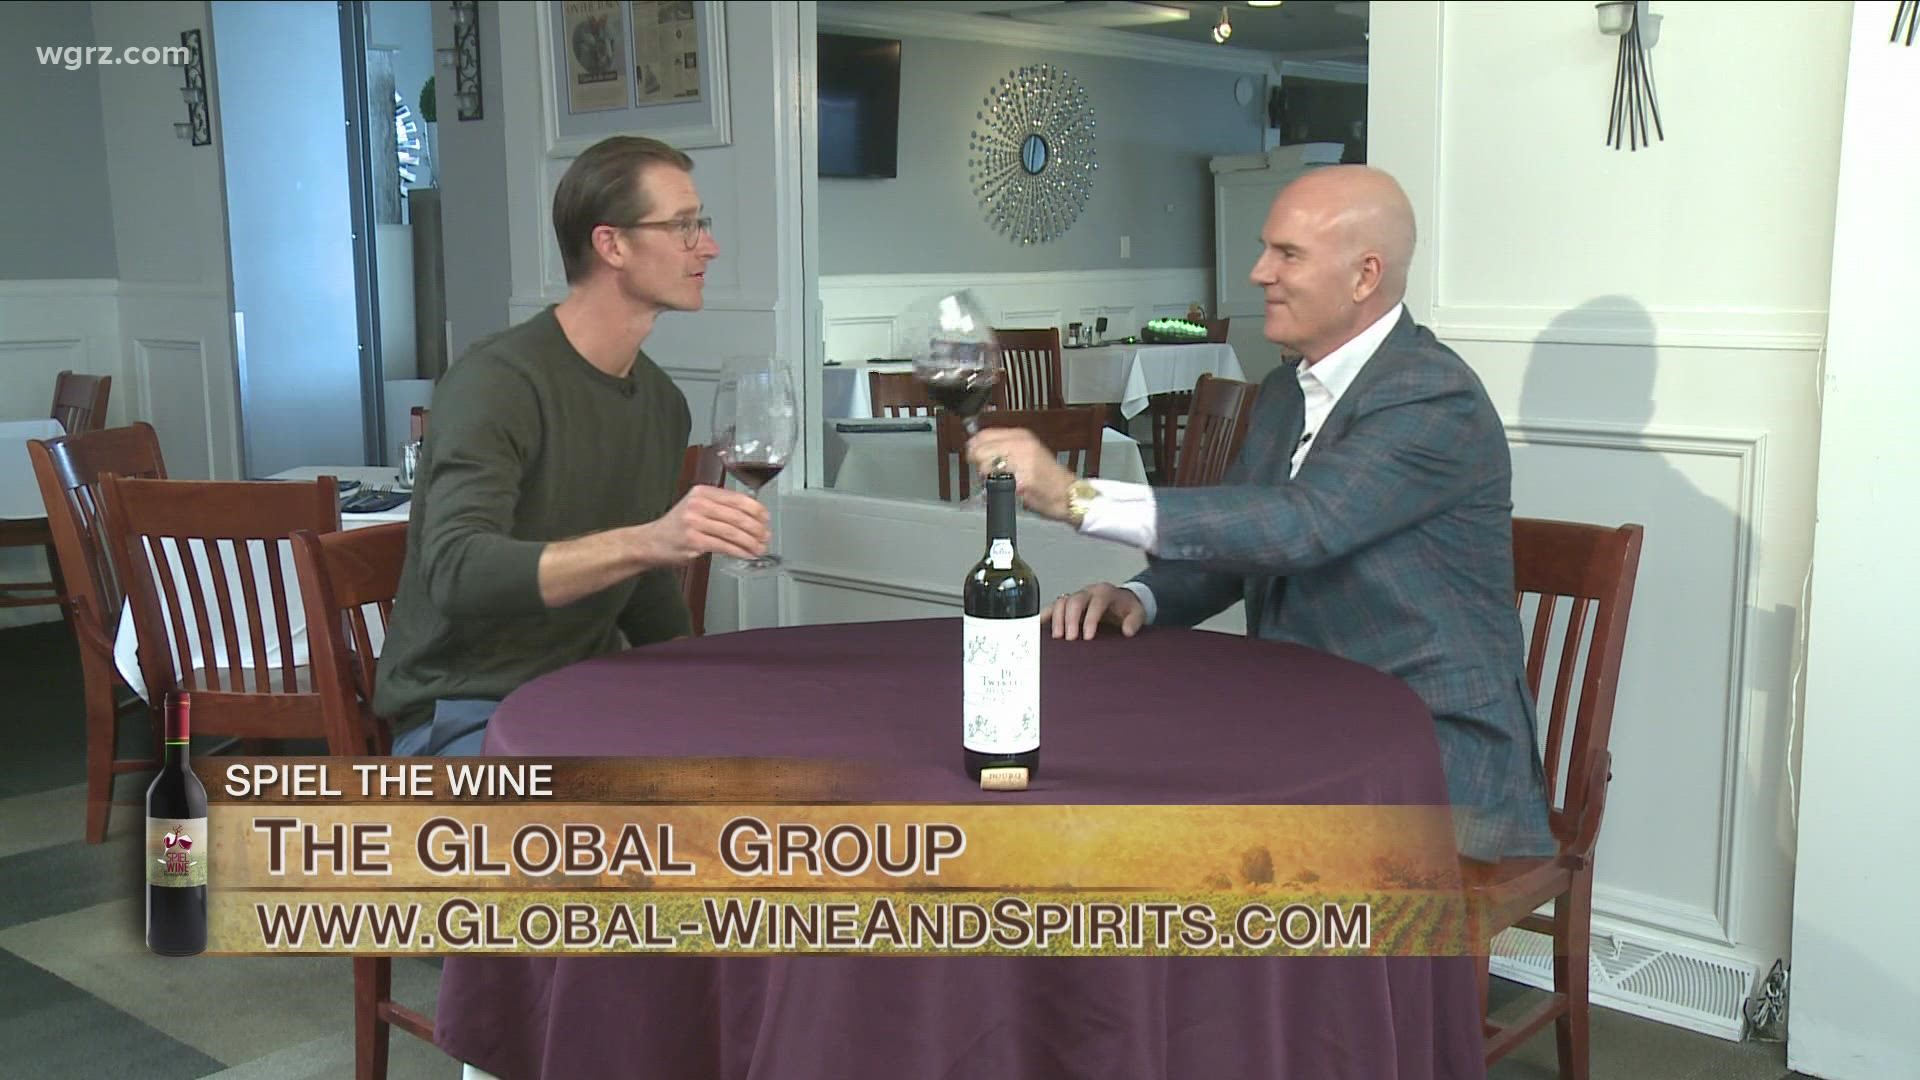 Spiel The Wine - October 9 - Segment 3 (THIS VIDEO IS SPONSORED BY THE GLOBAL GROUP)